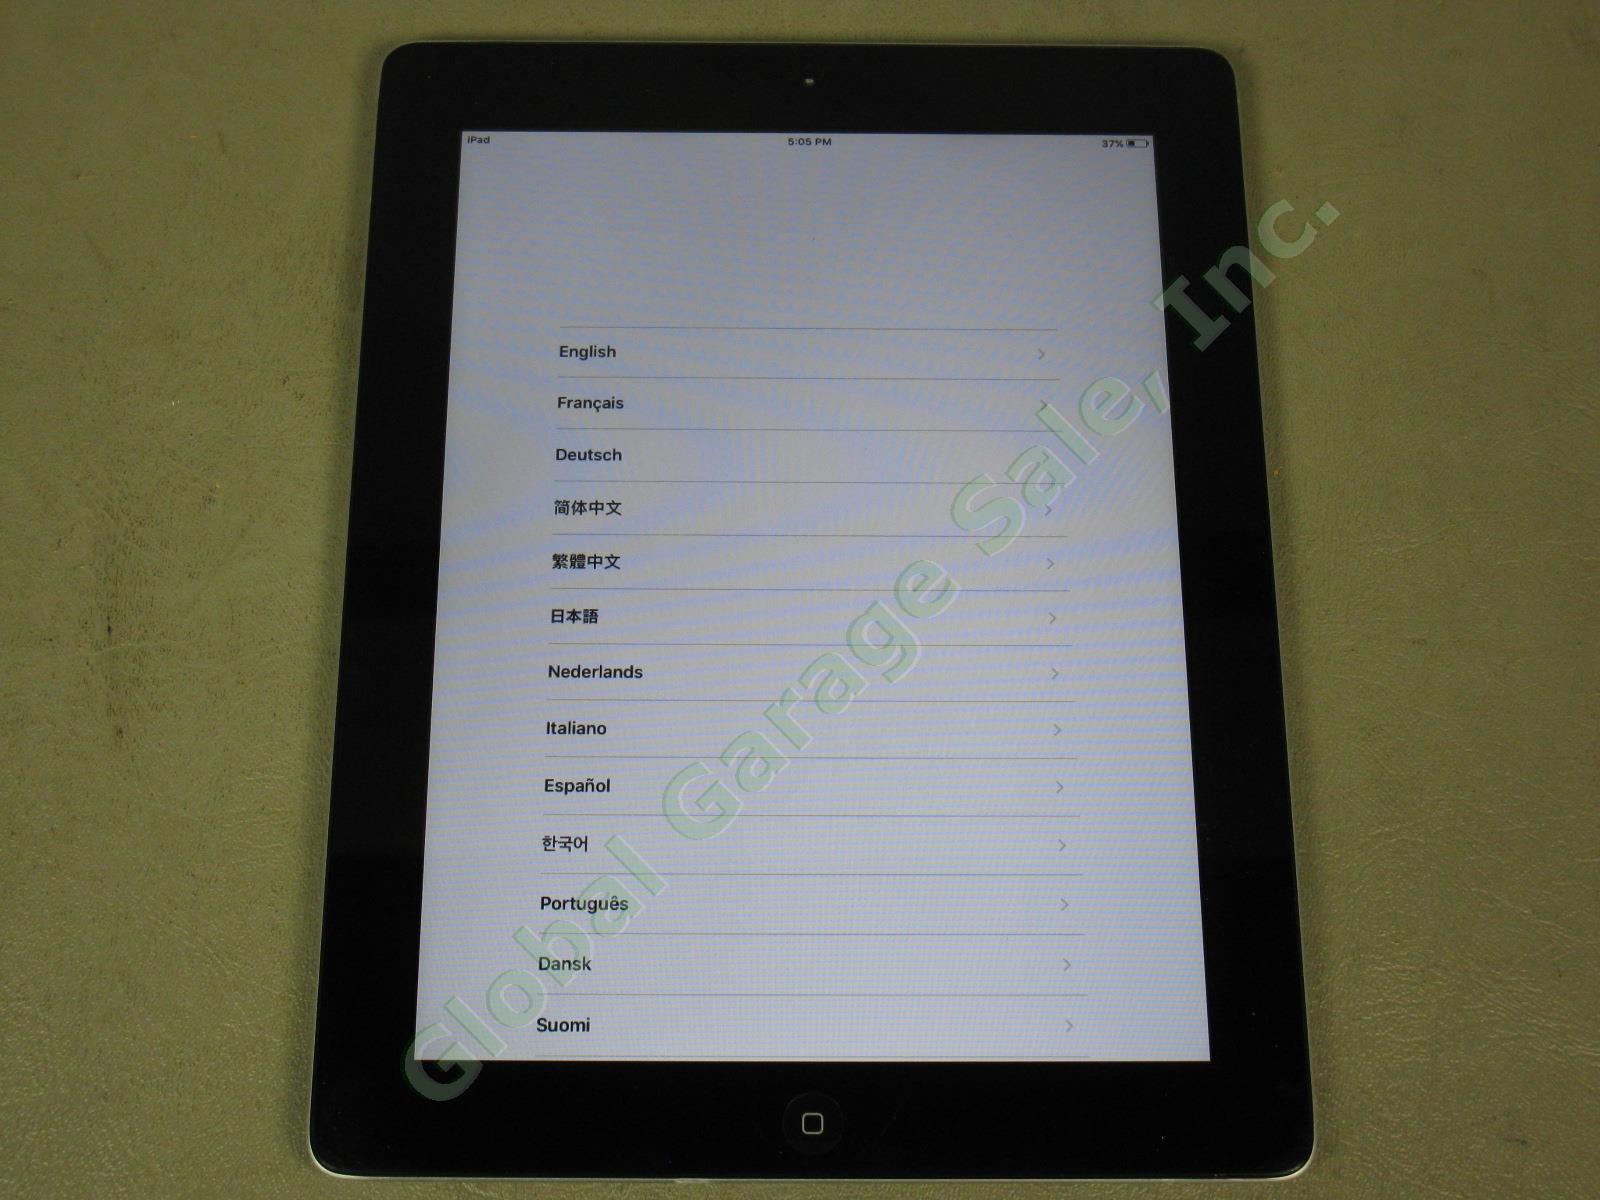 Apple iPad 2 Wifi 16GB Black Tablet Works Great MC770LL/A A1395 No Reserve Price 1